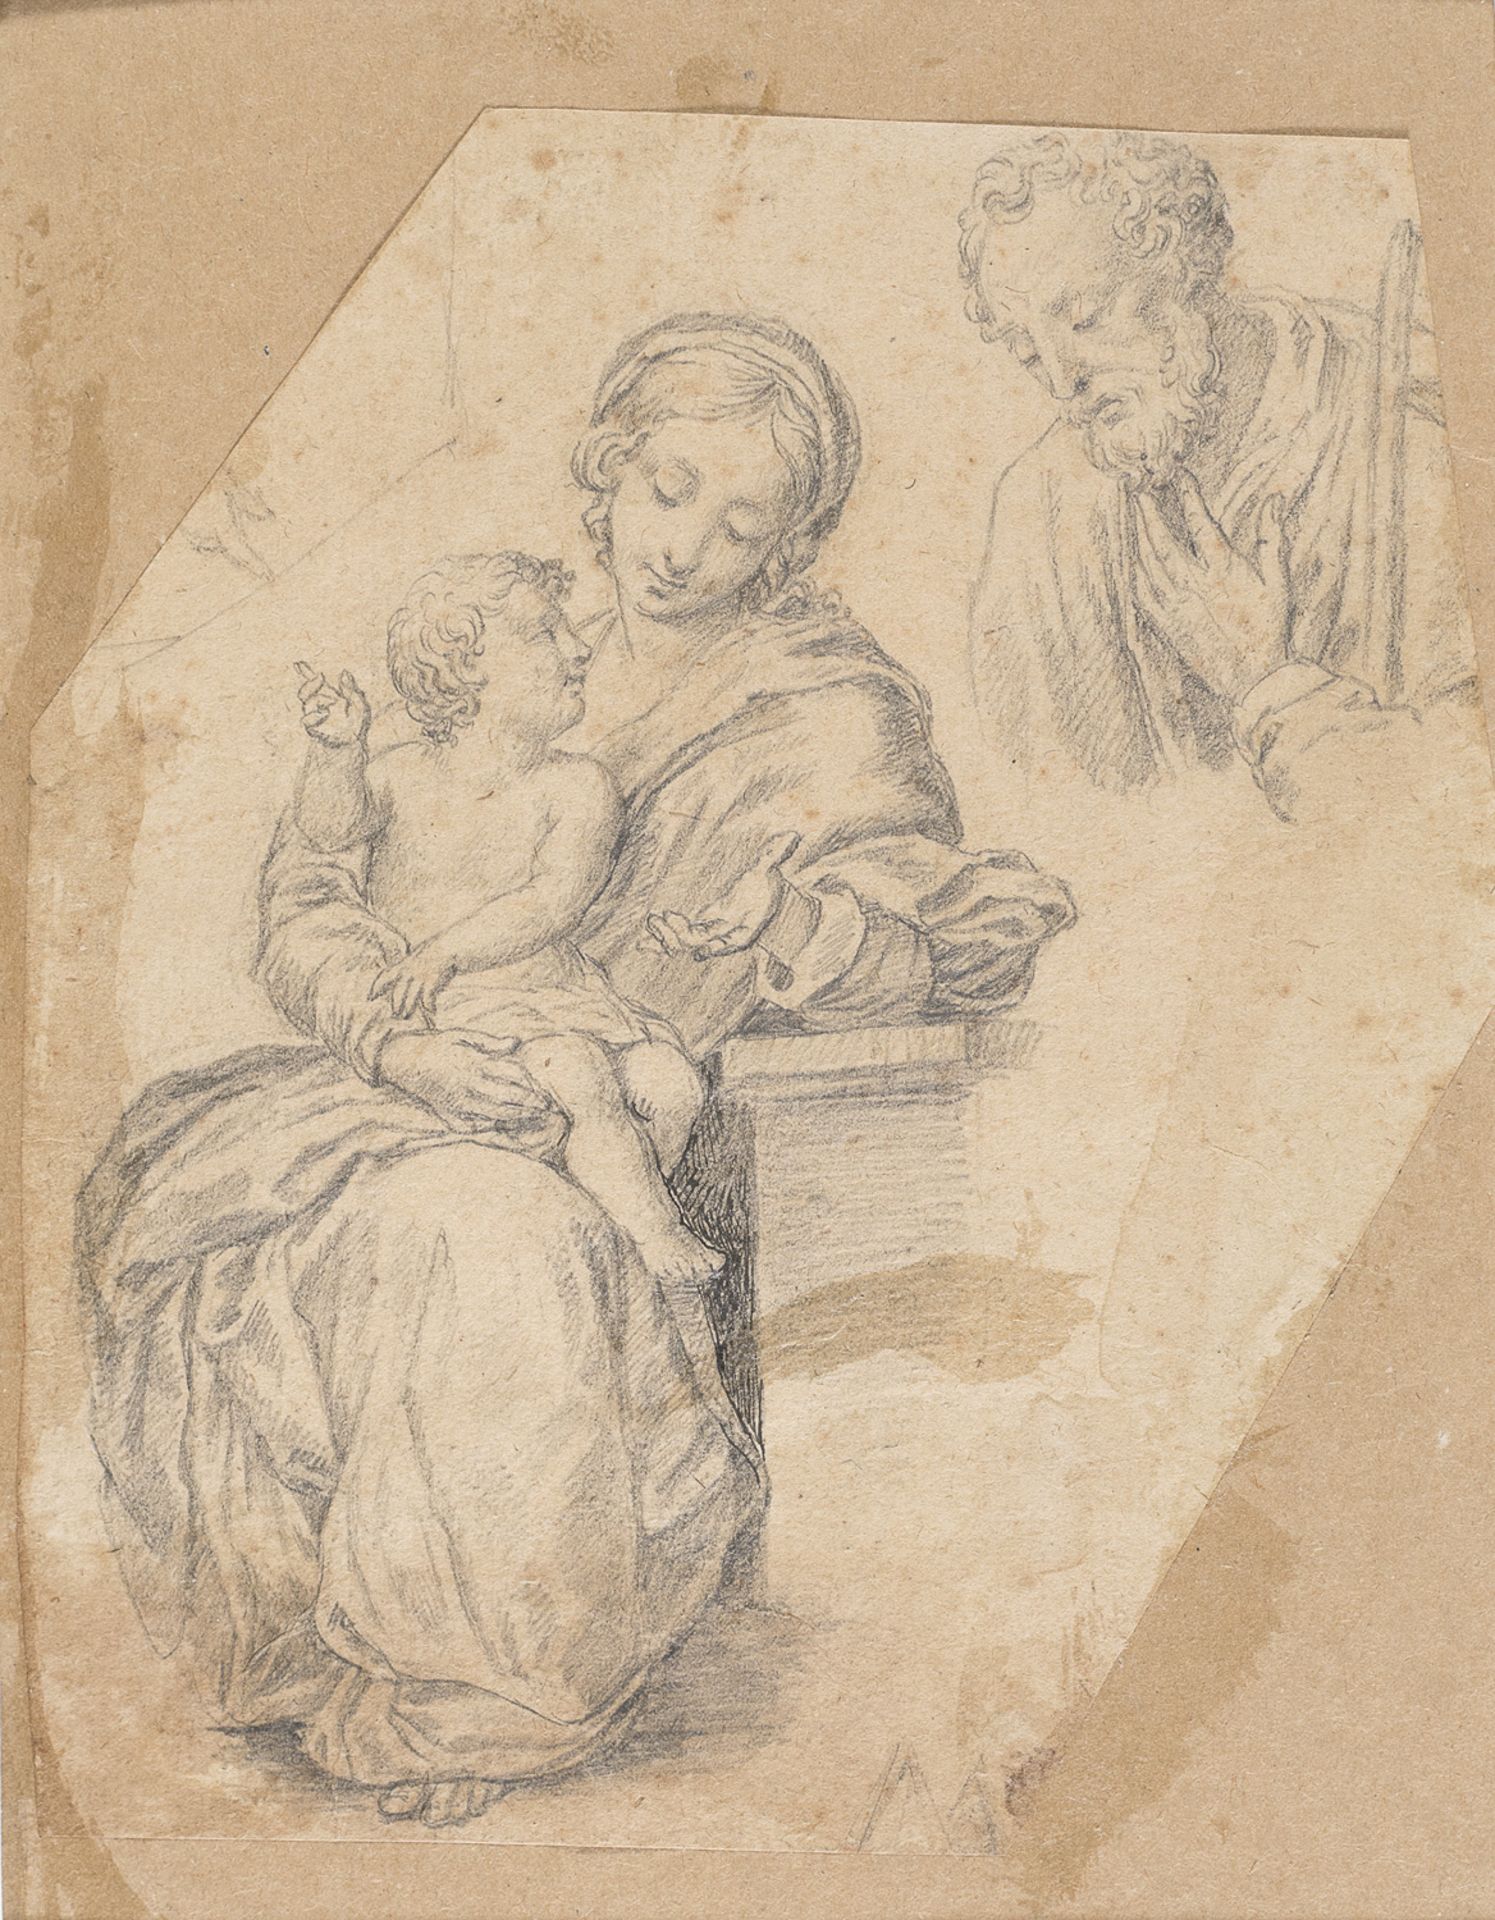 ROMAN PENCIL DRAWING OF THE HOLY FAMILY LATE 18TH EARLY 19TH CENTURY